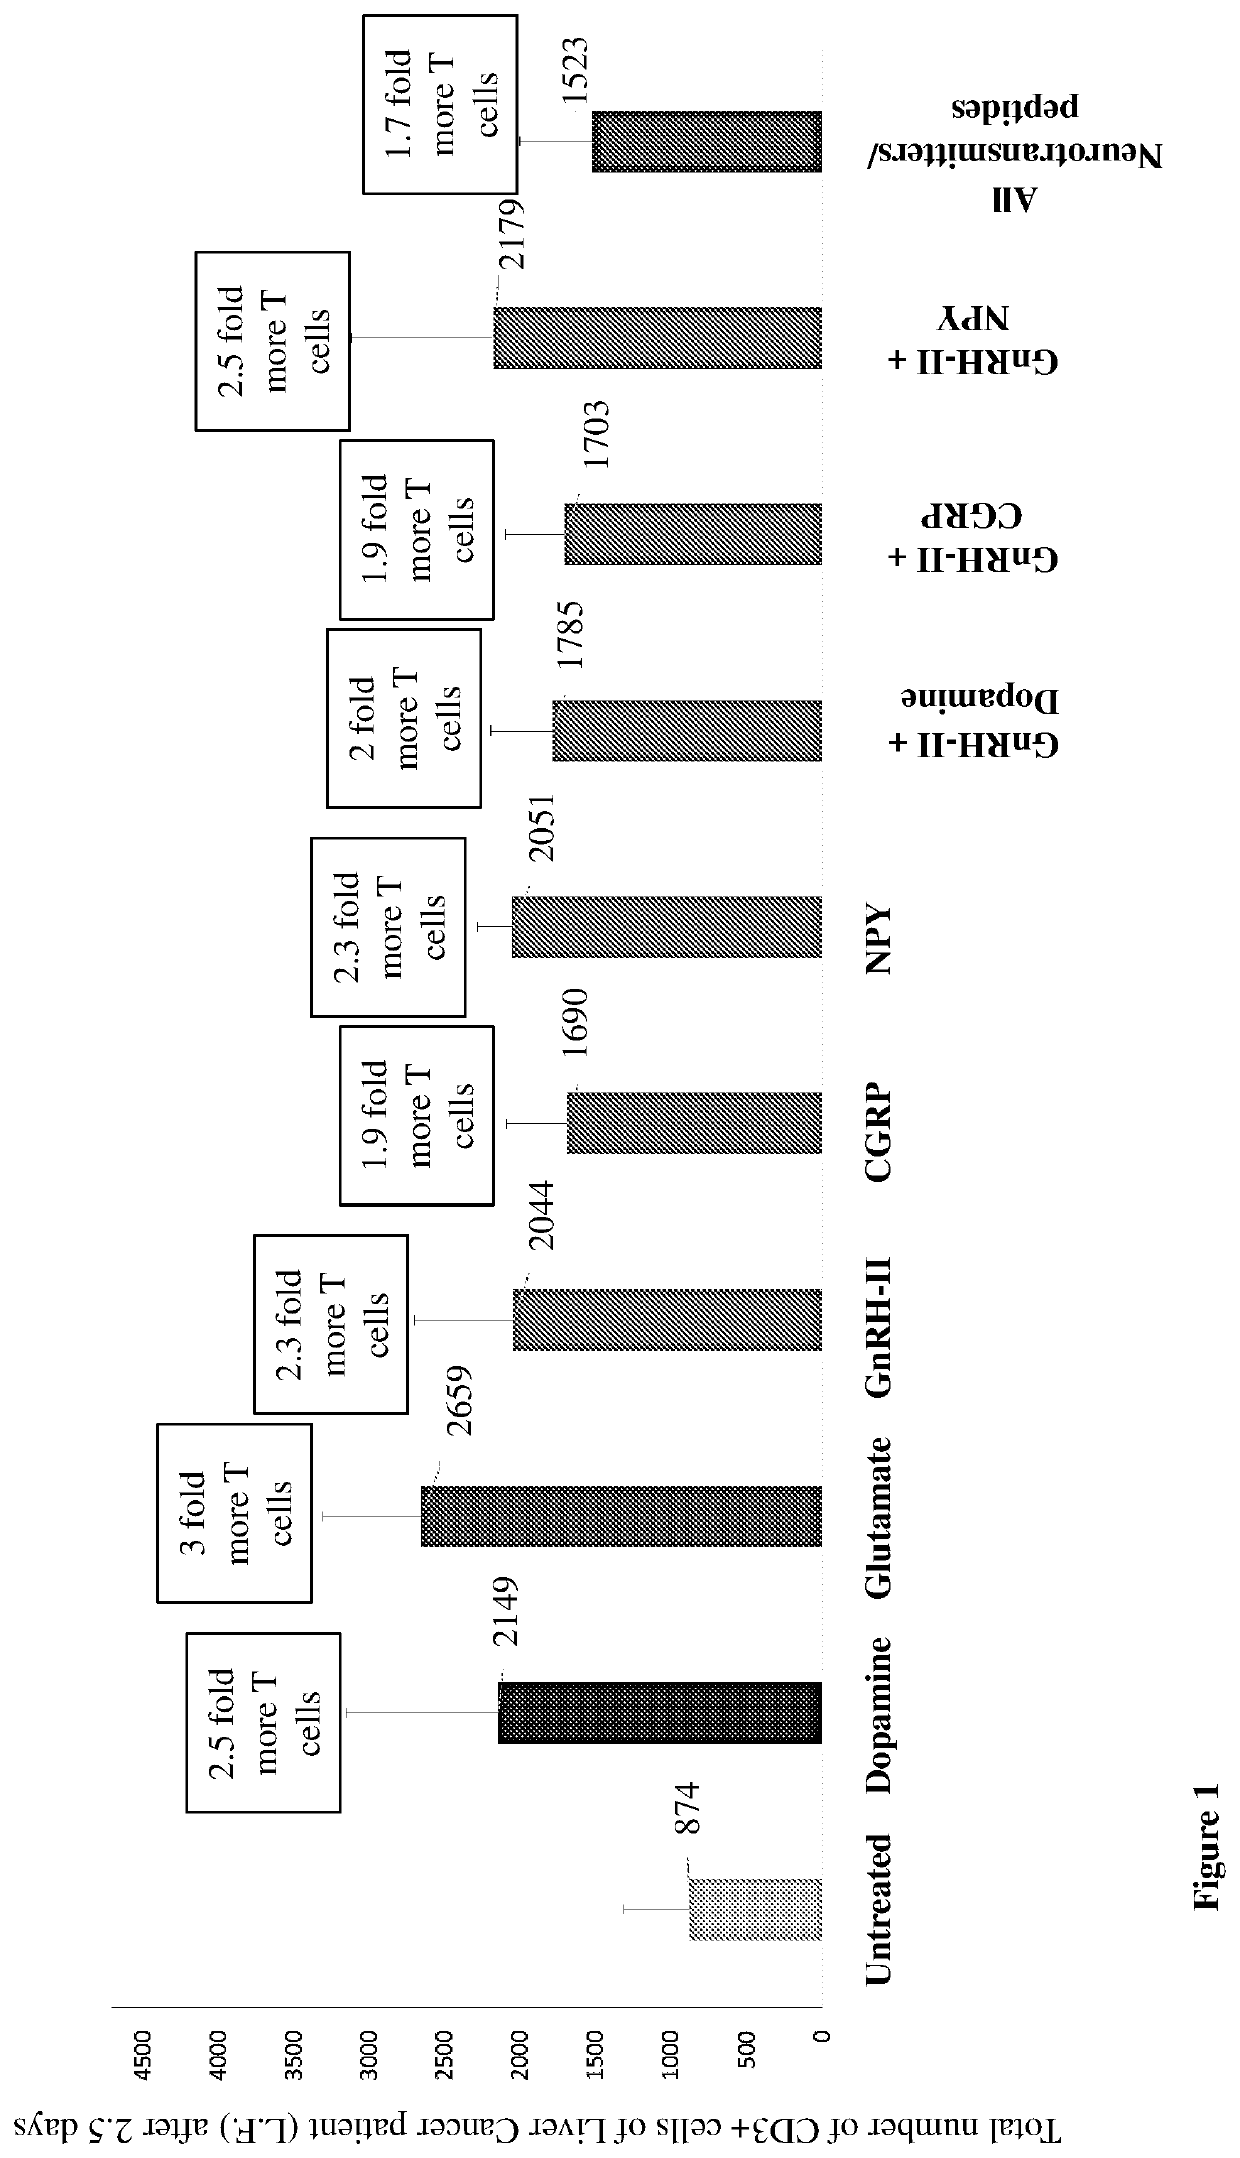 Methods for improved immunotherapy